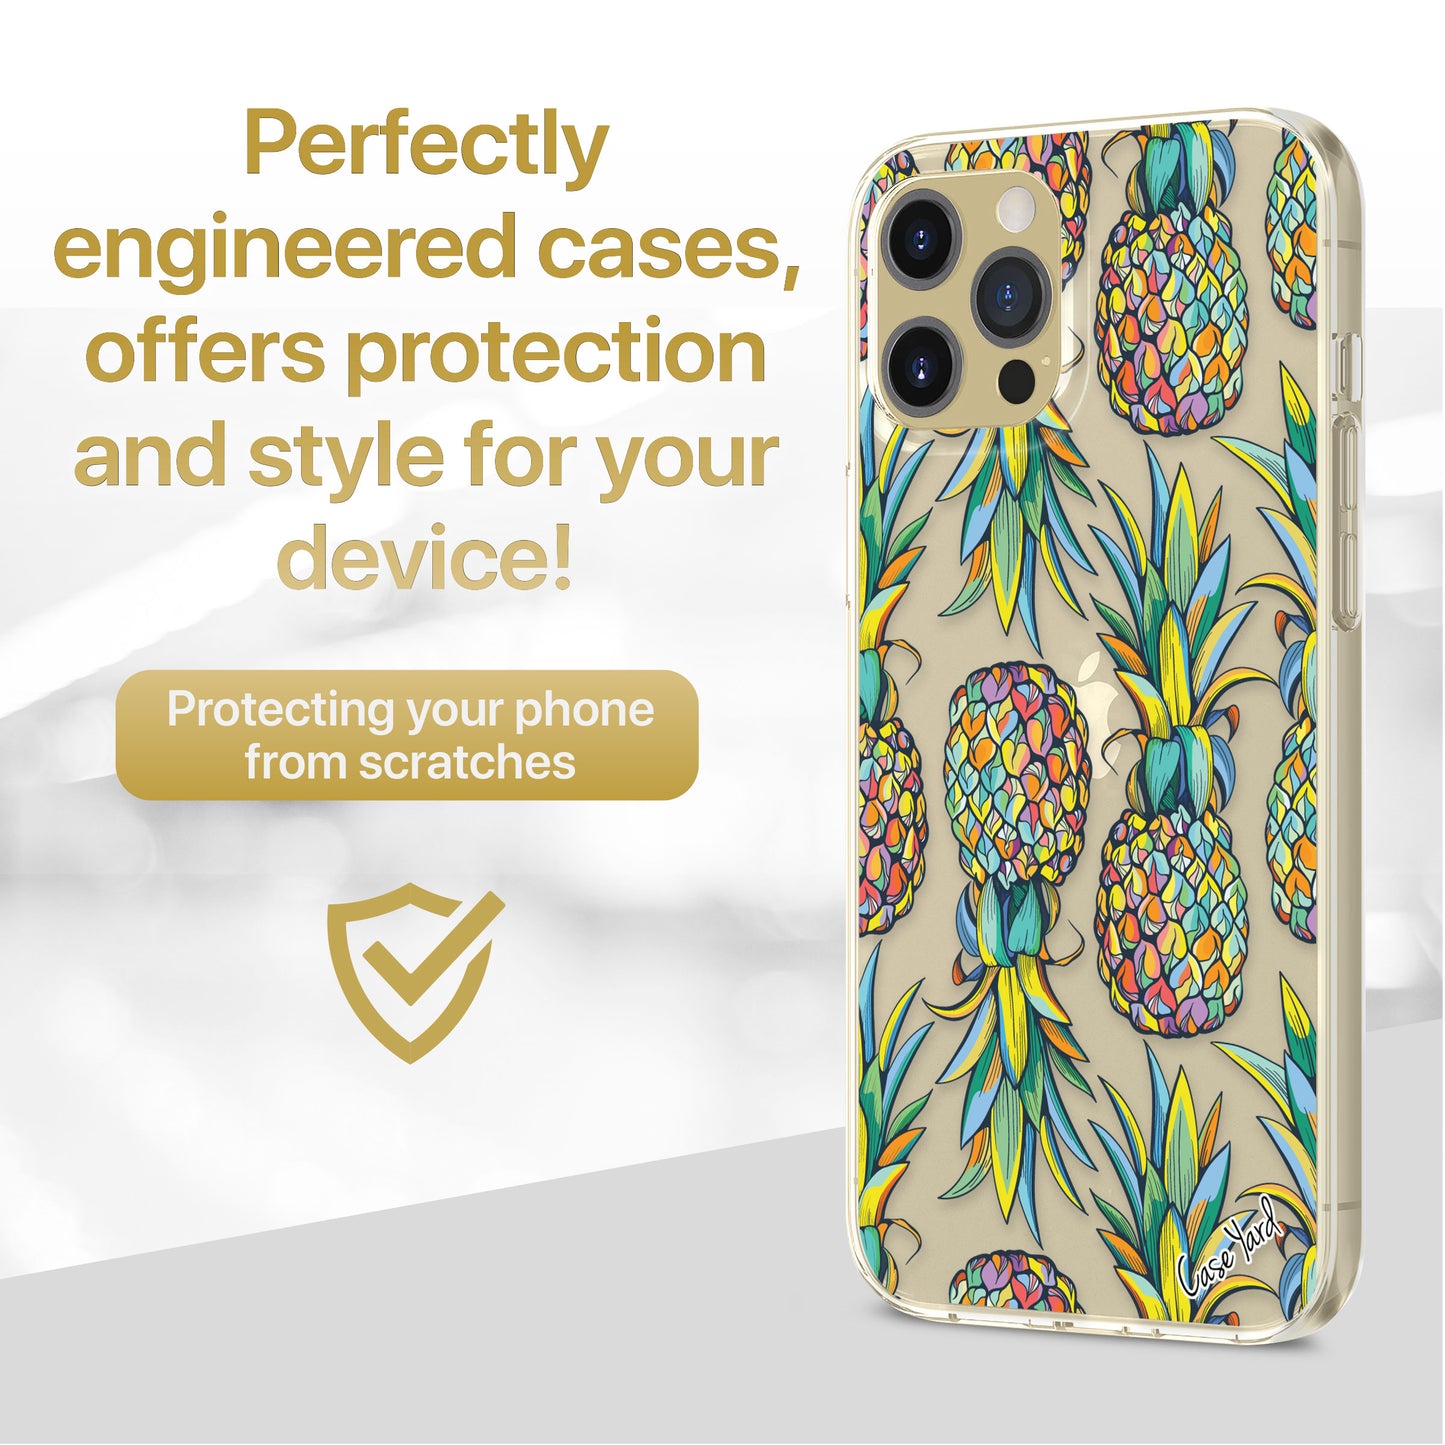 TPU Clear case with (Summer Pineapple) Design for iPhone & Samsung Phones